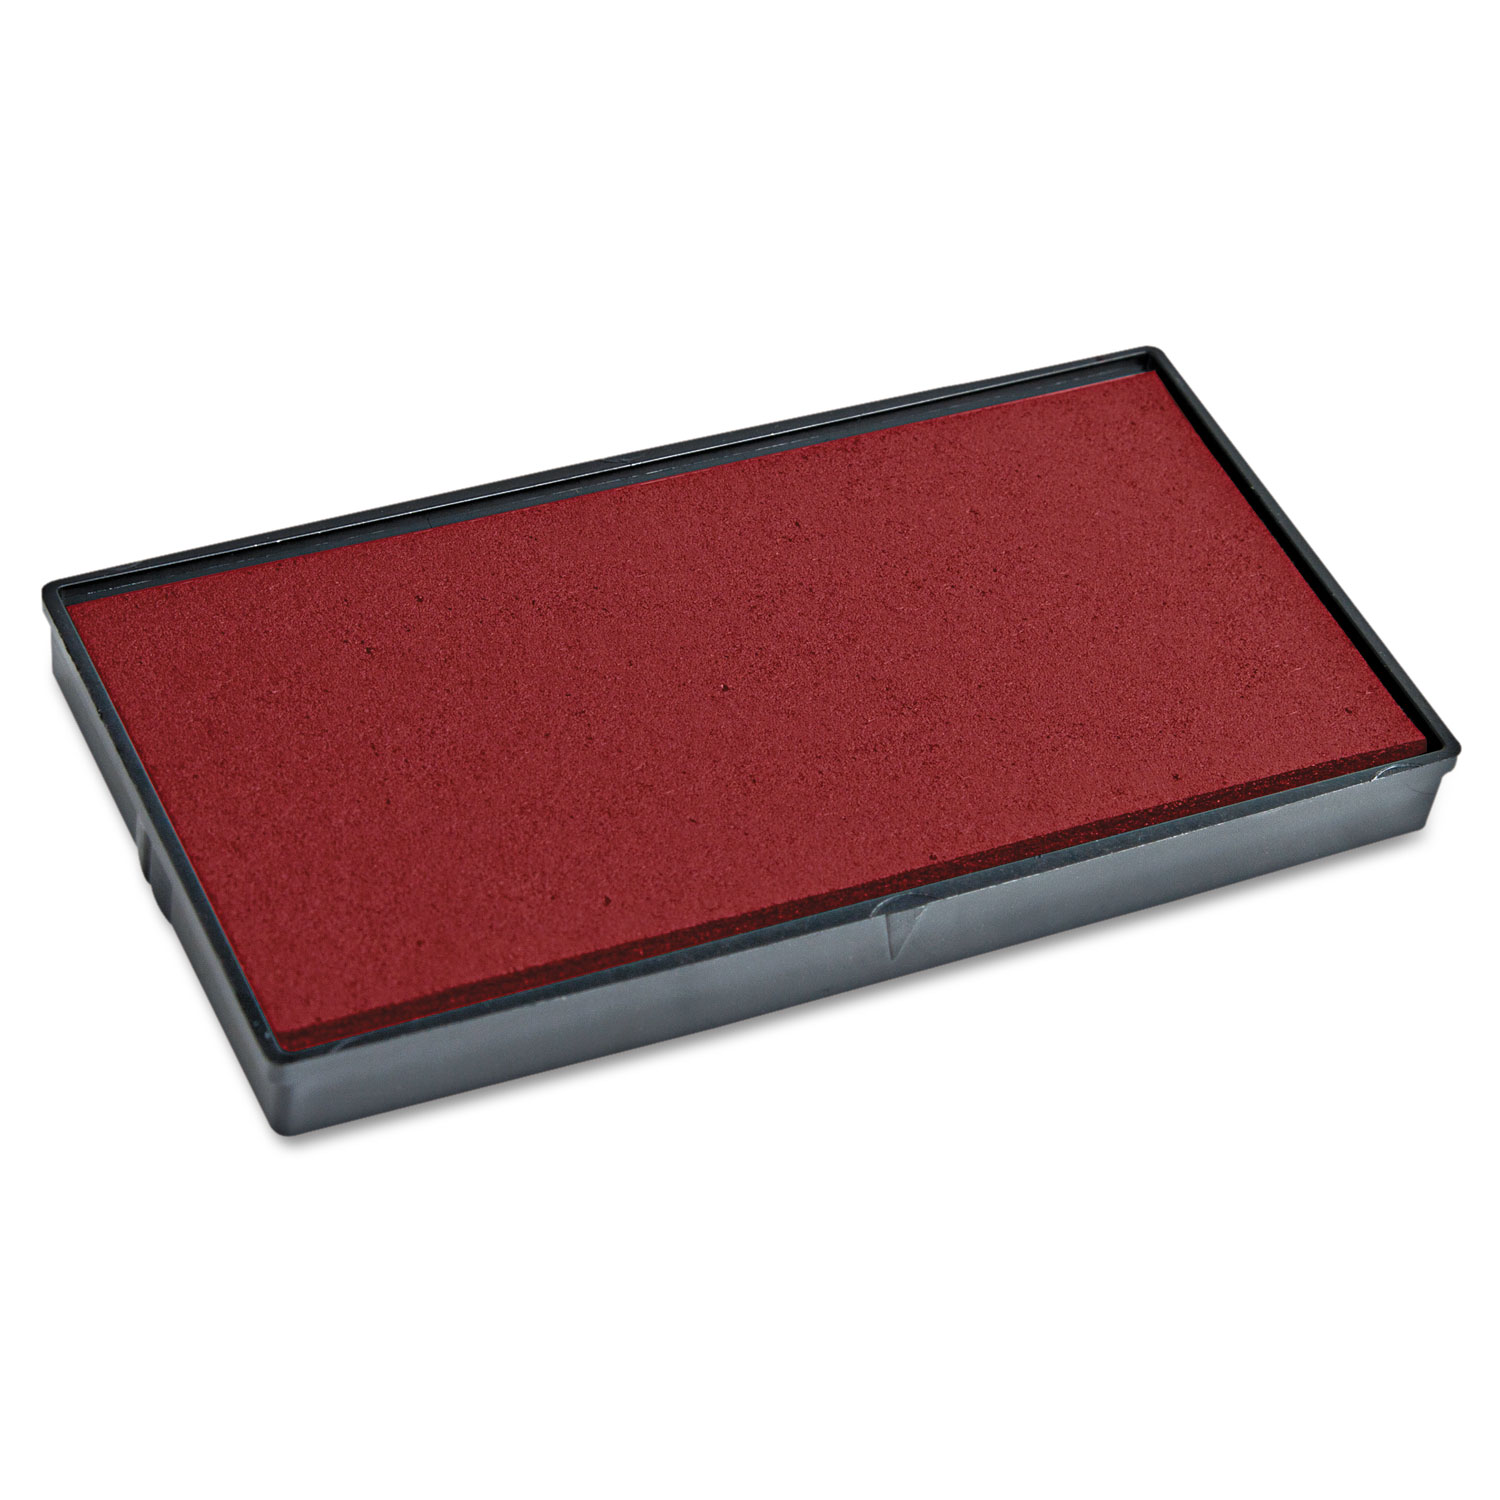  COSCO 2000PLUS 065488 Replacement Ink Pad for 2000PLUS 1SI15P, Red (COS065488) 